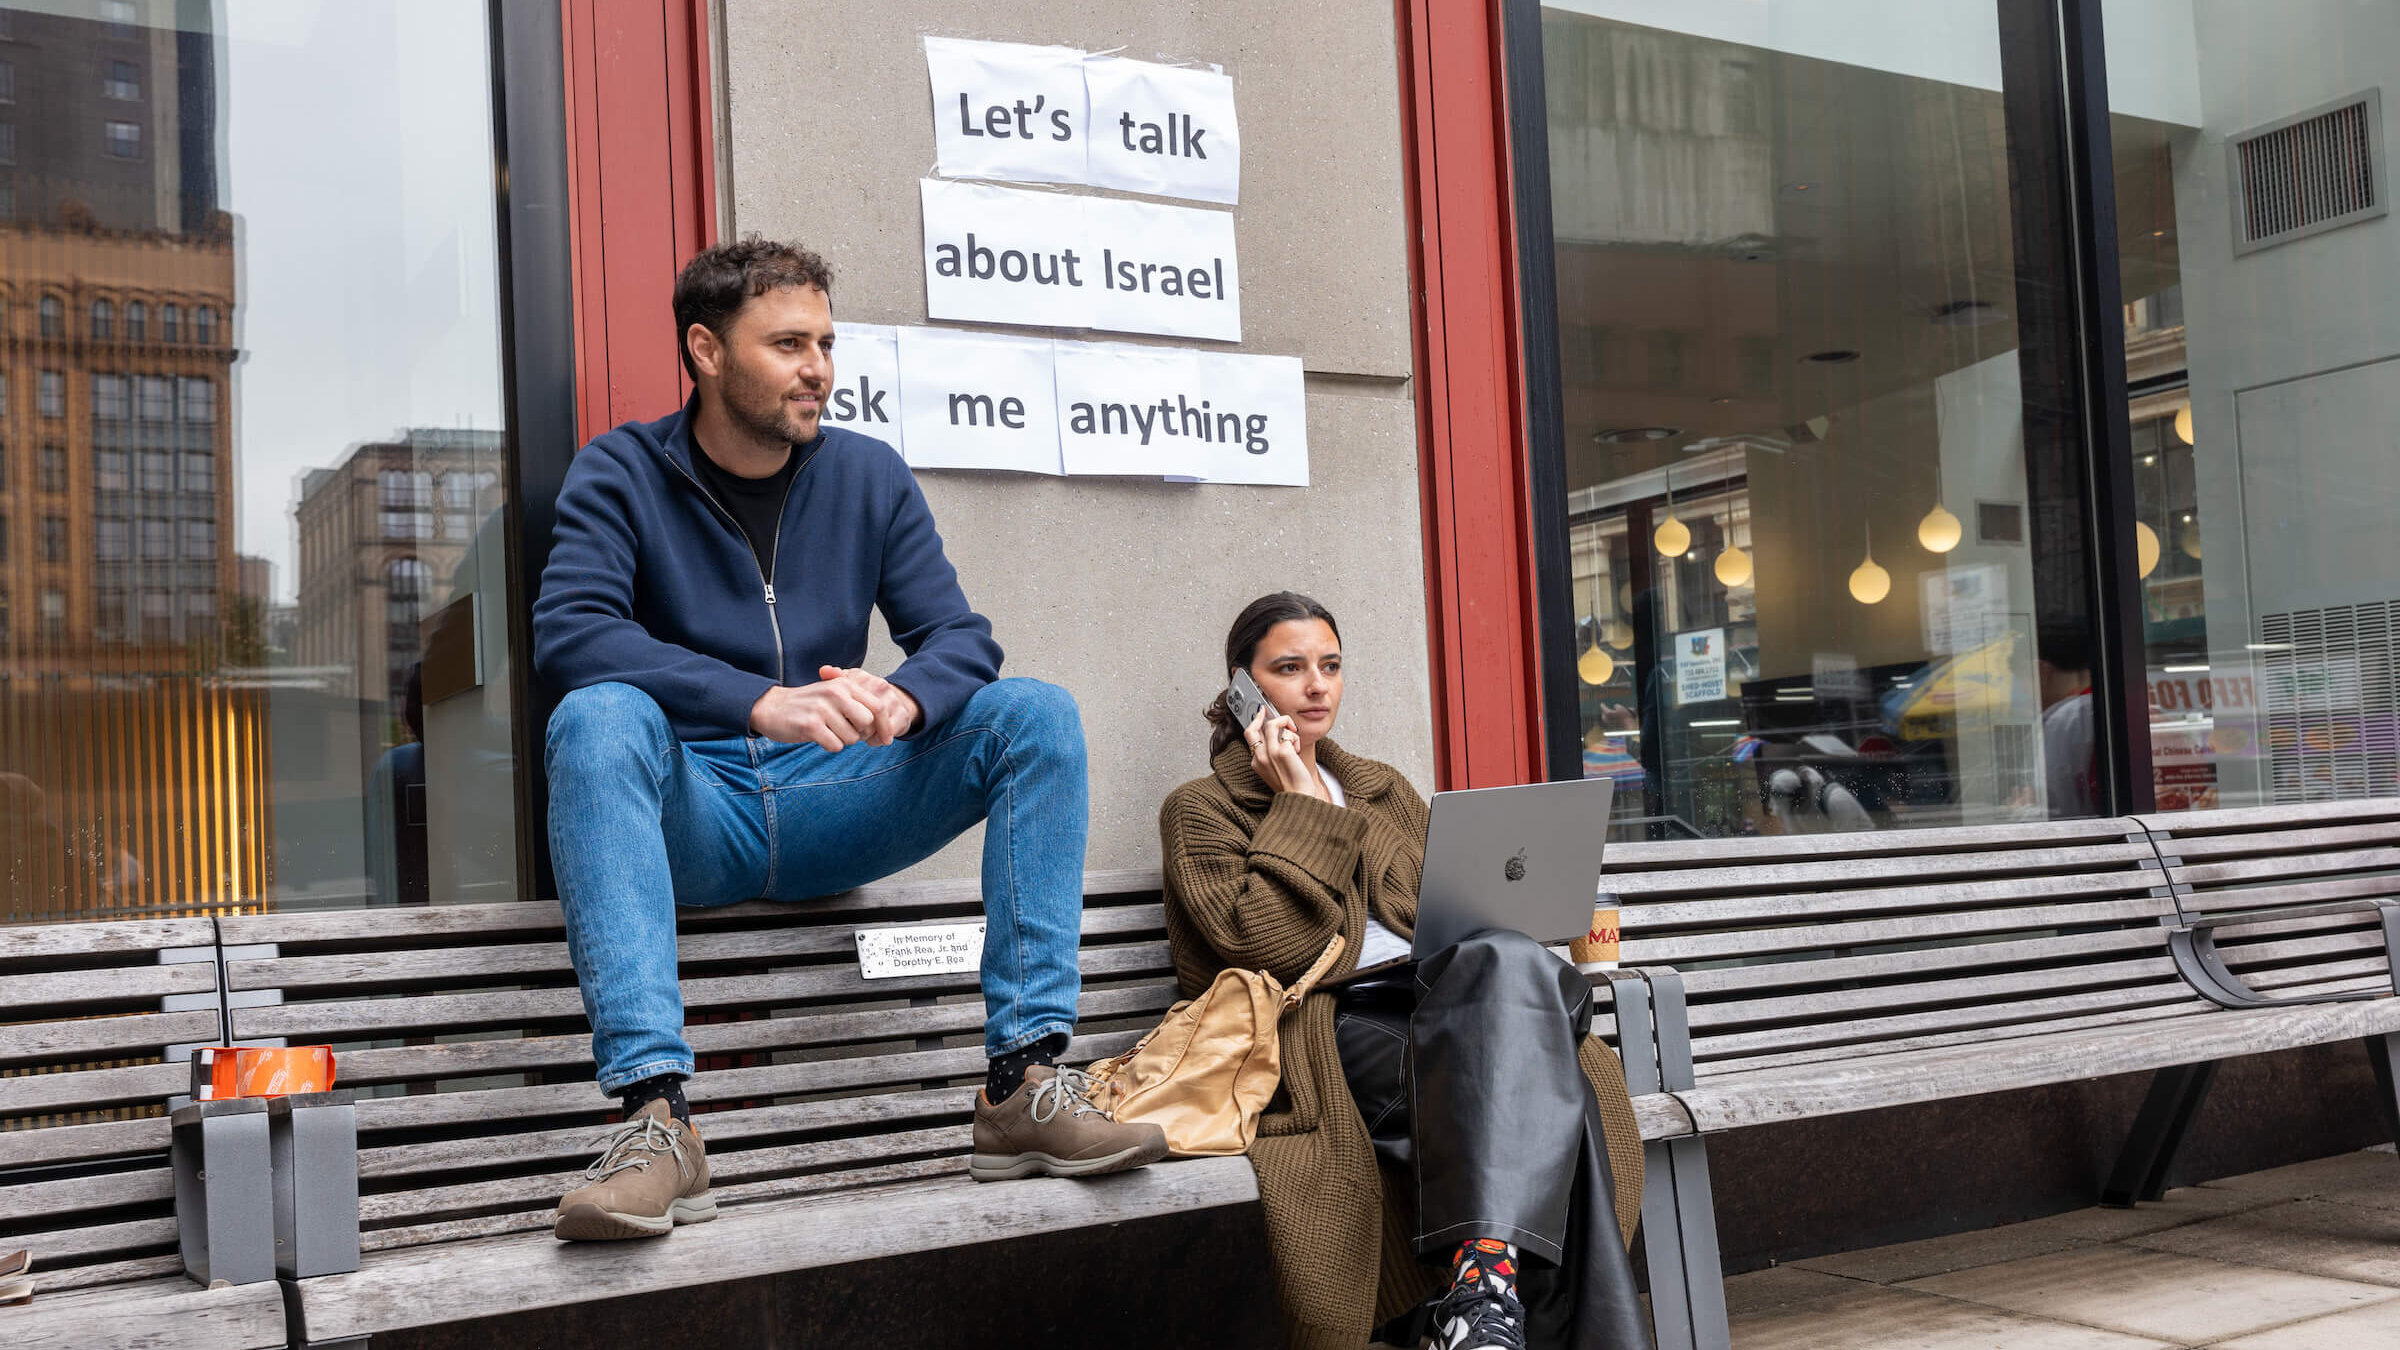 Students from Israel at New York University offer to speak with classmates about their home country as tensions between supporters of Israelis and Palestinians increase on college campuses across the nation.